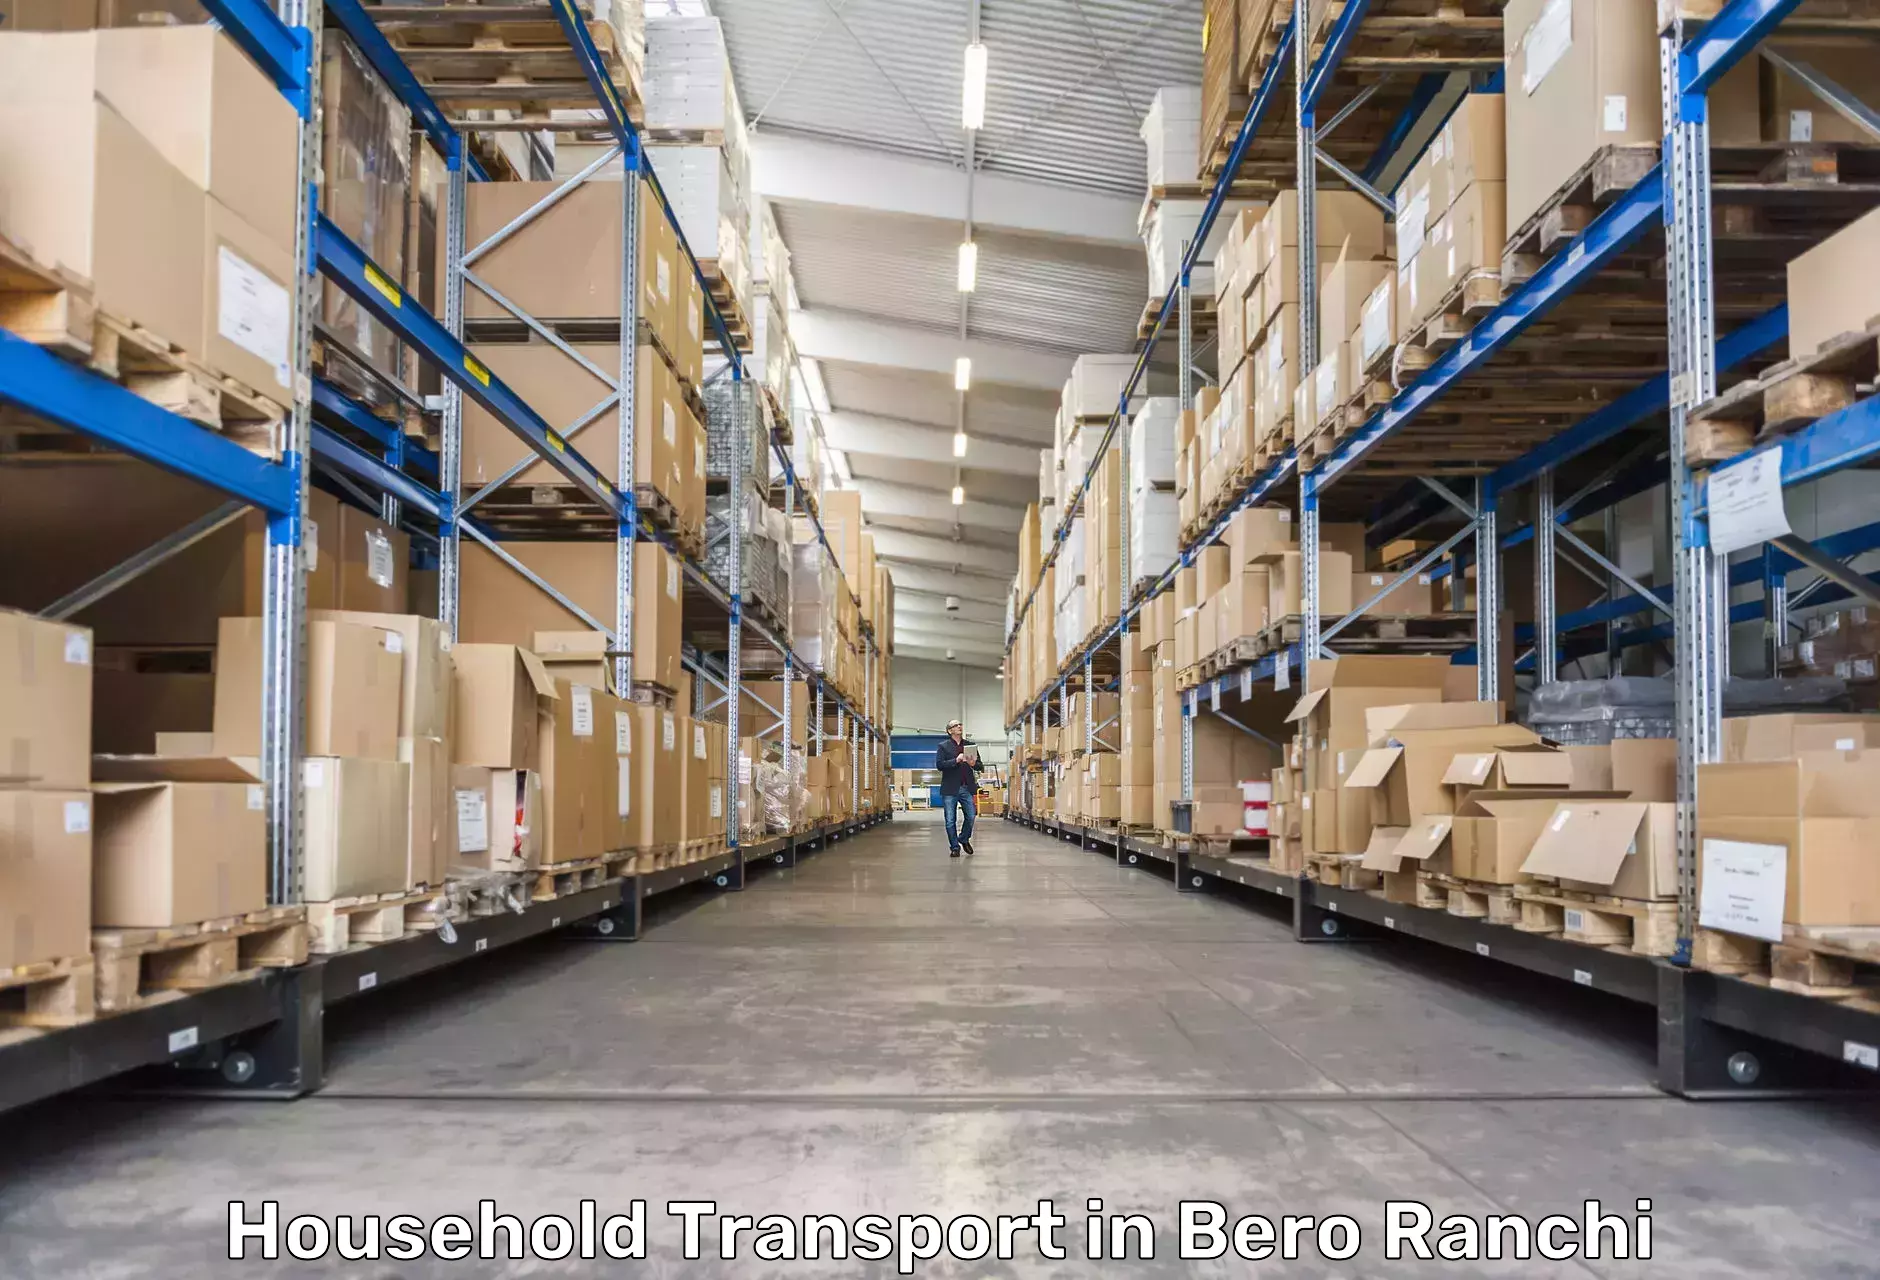 Household transport solutions in Bero Ranchi